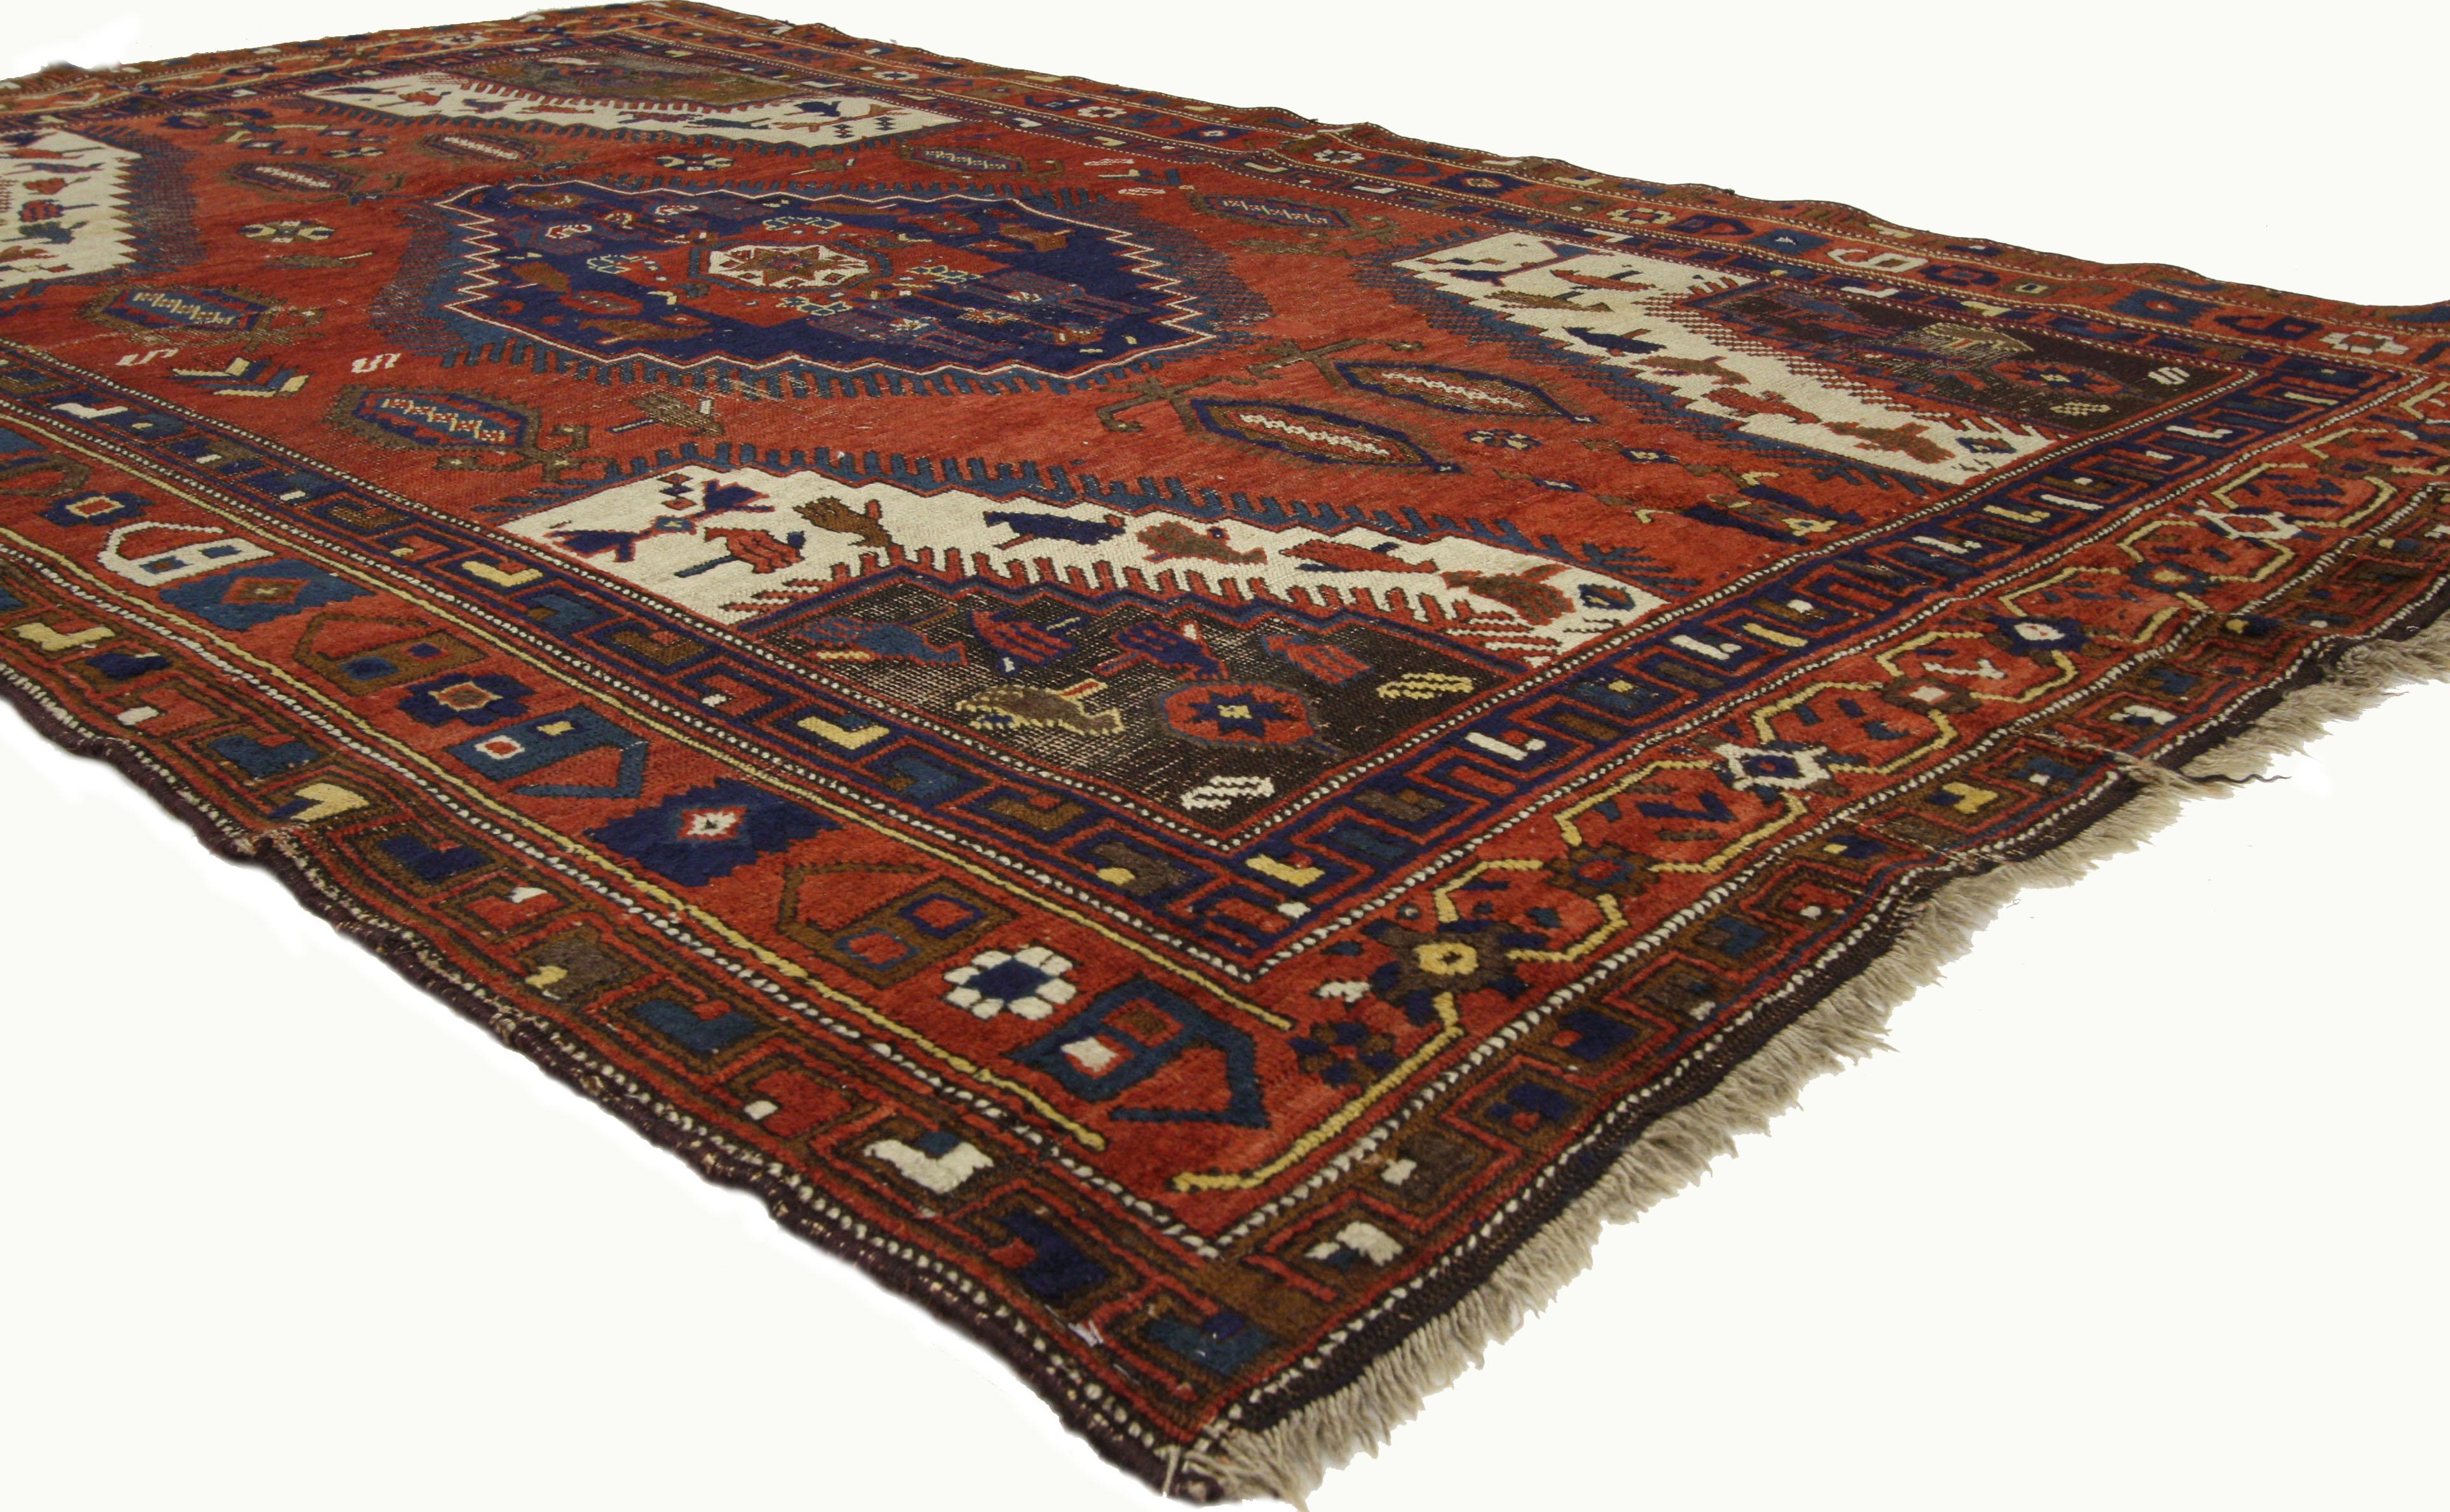 Hand-Knotted Distressed Antique Turkish Bergama Rug with Adirondack Style